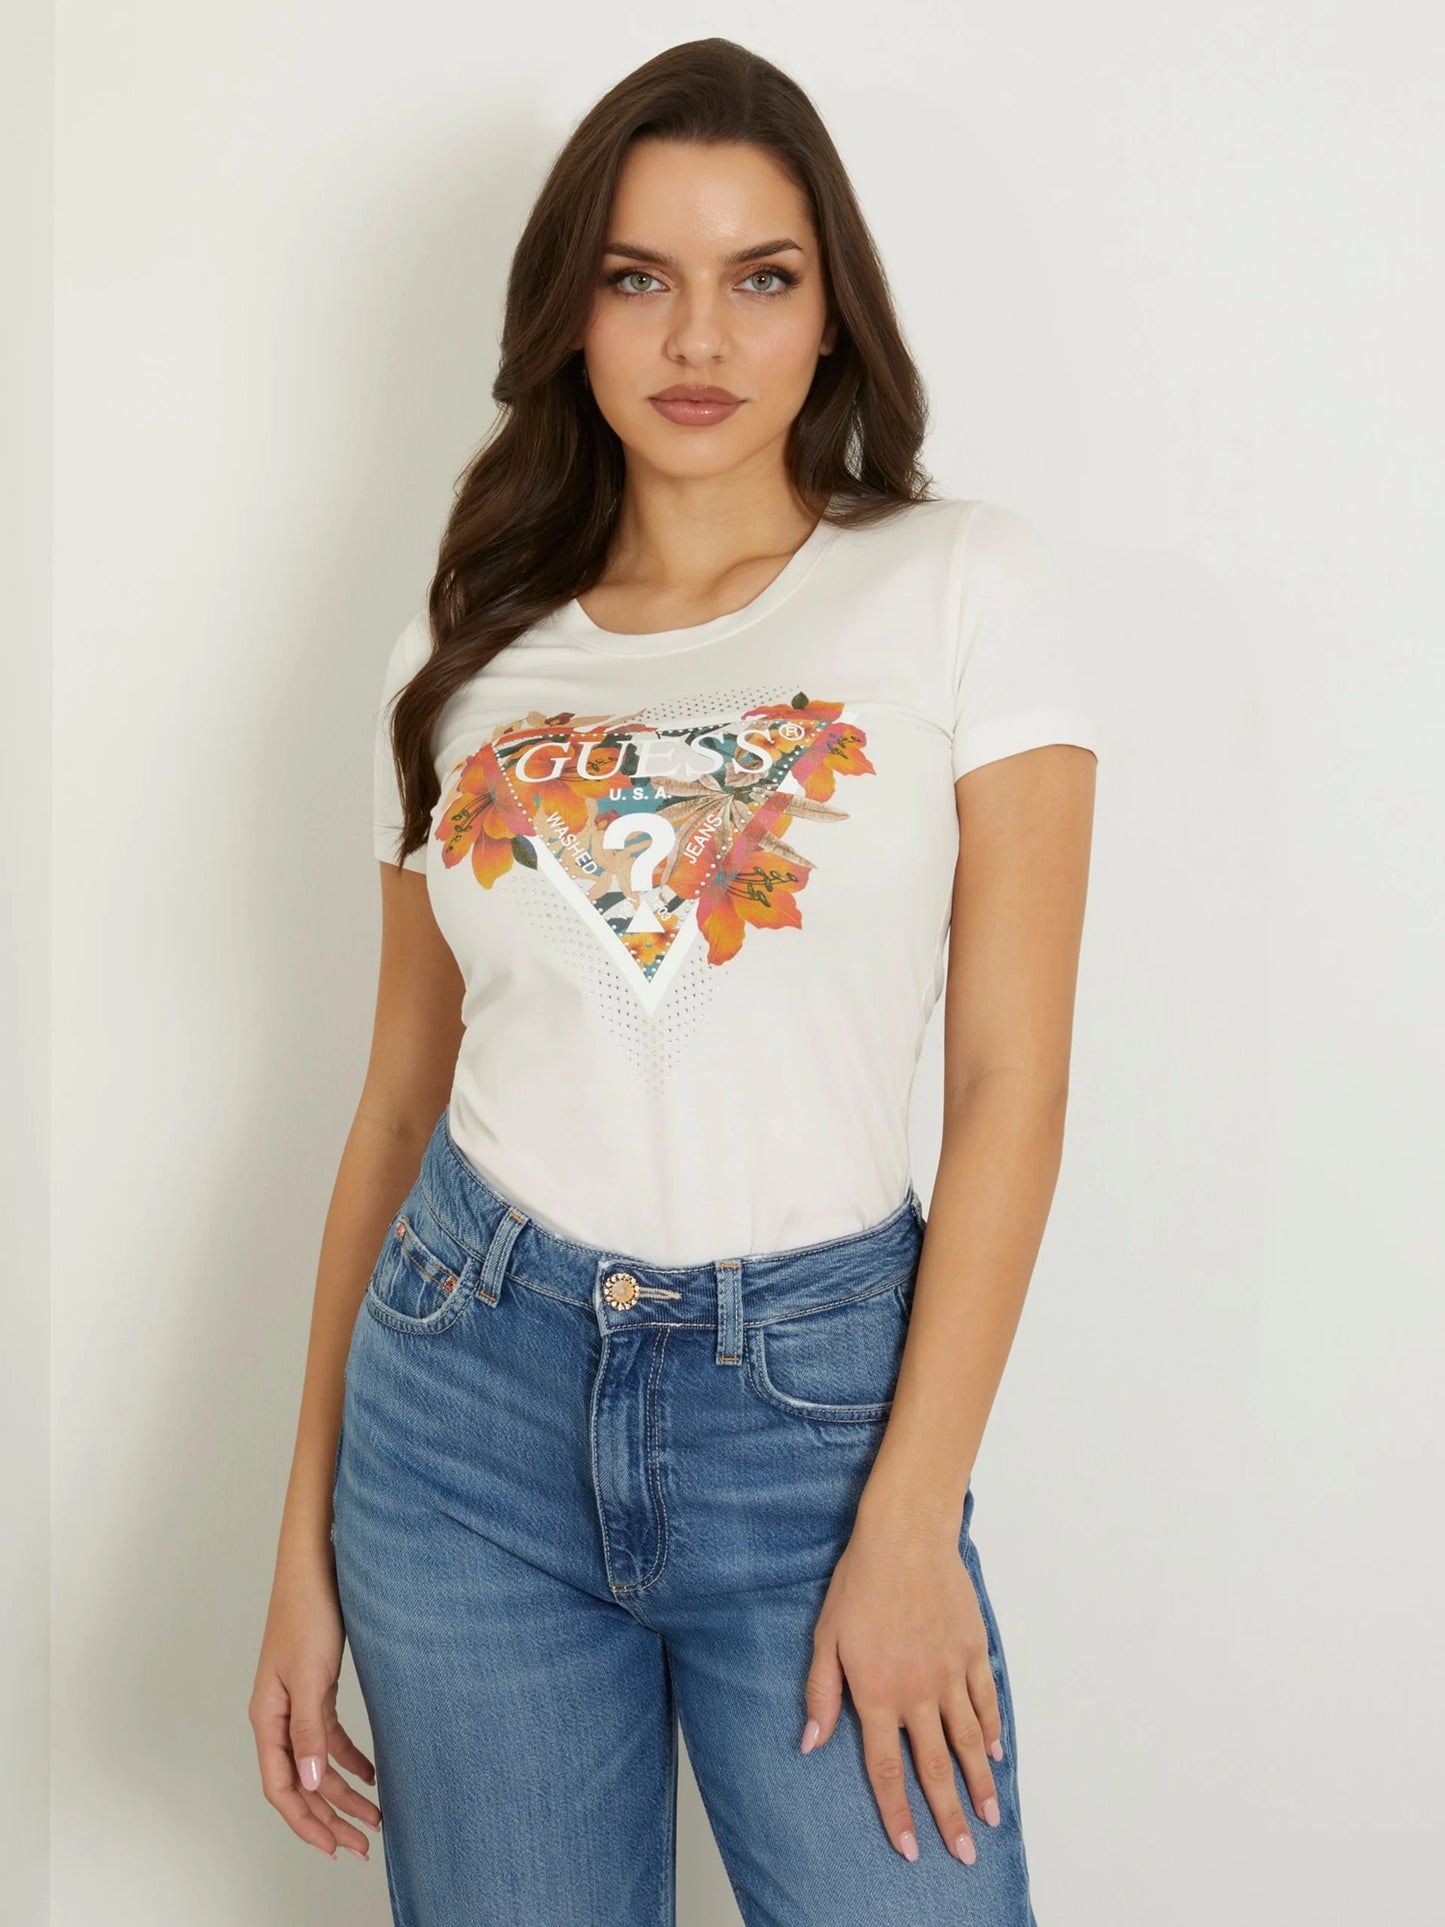 Guess Tropical Triangle Tee